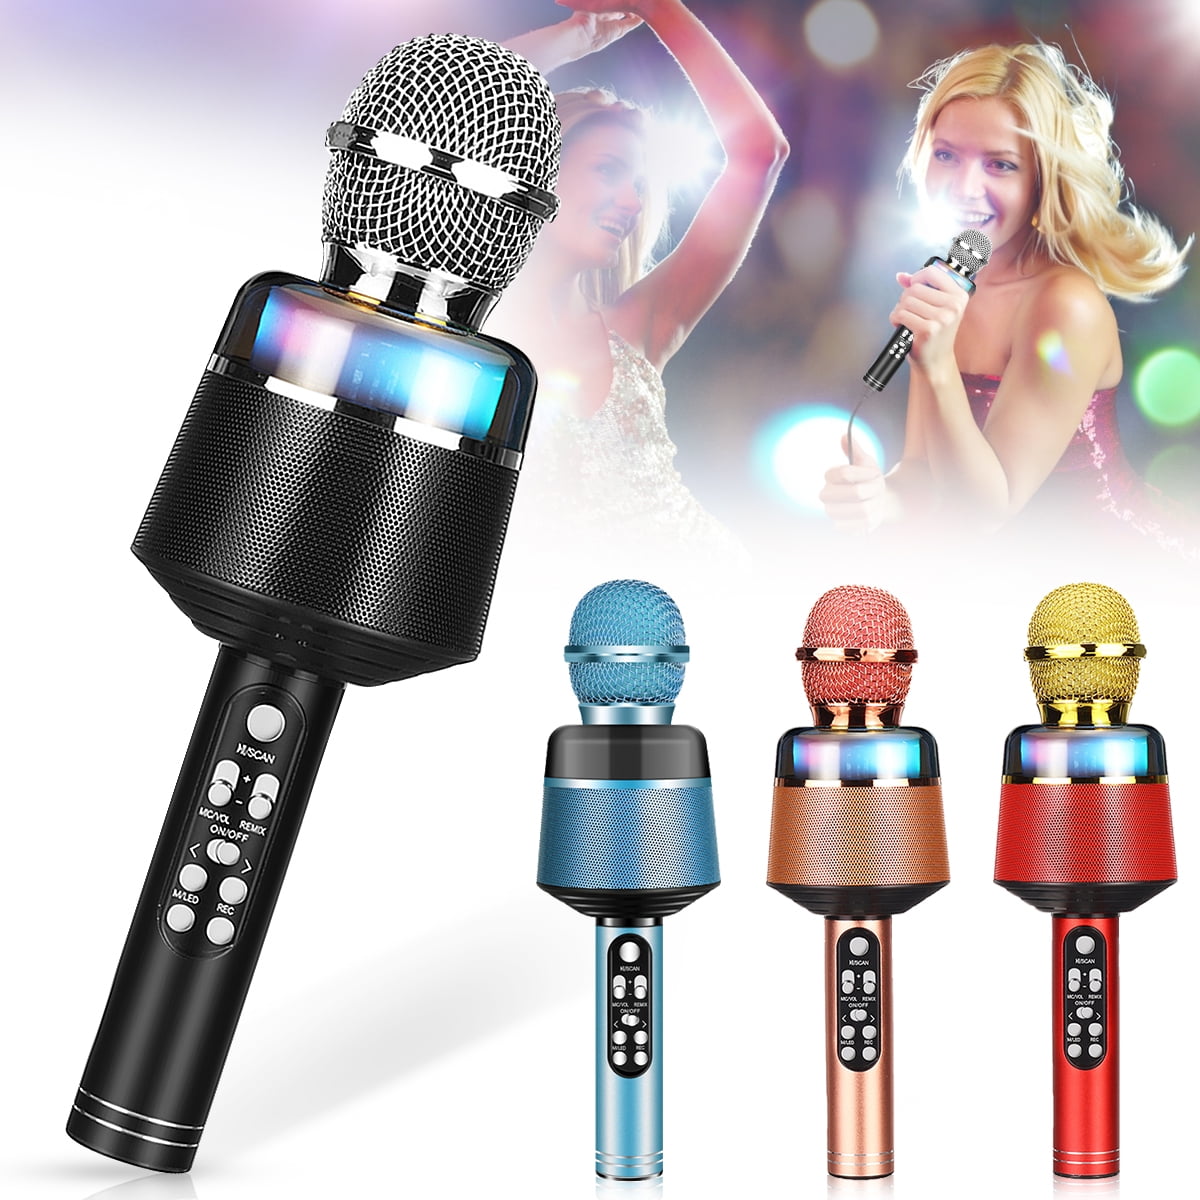 Portable Bluetooth Handheld Microphone Speaker for Boys & Girls Pink+Blue CYY Karaoke Wireless Microphone Toys for 3-12 Years Old Kids Gifts for Children or Adults Birthday Party or Christmas 